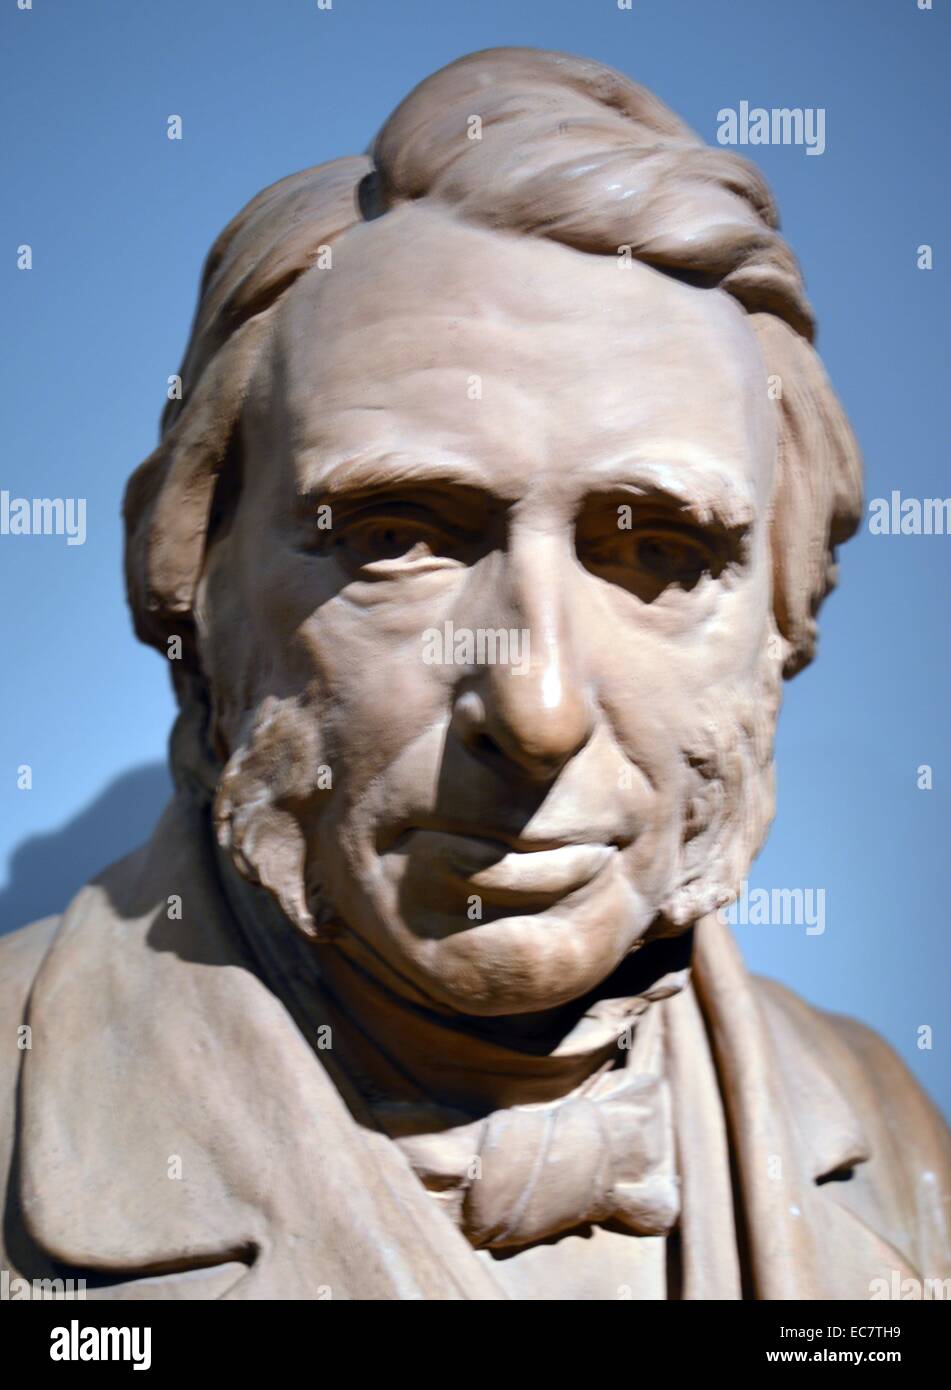 John Ruskin by Sir John Edgar Boehm (1834-1890) terracotta.  John Ruskin (1819-1900) was the first Slade Professor of Fine Art at Oxford and the founder of the Ruskin School of Drawing. Stock Photo